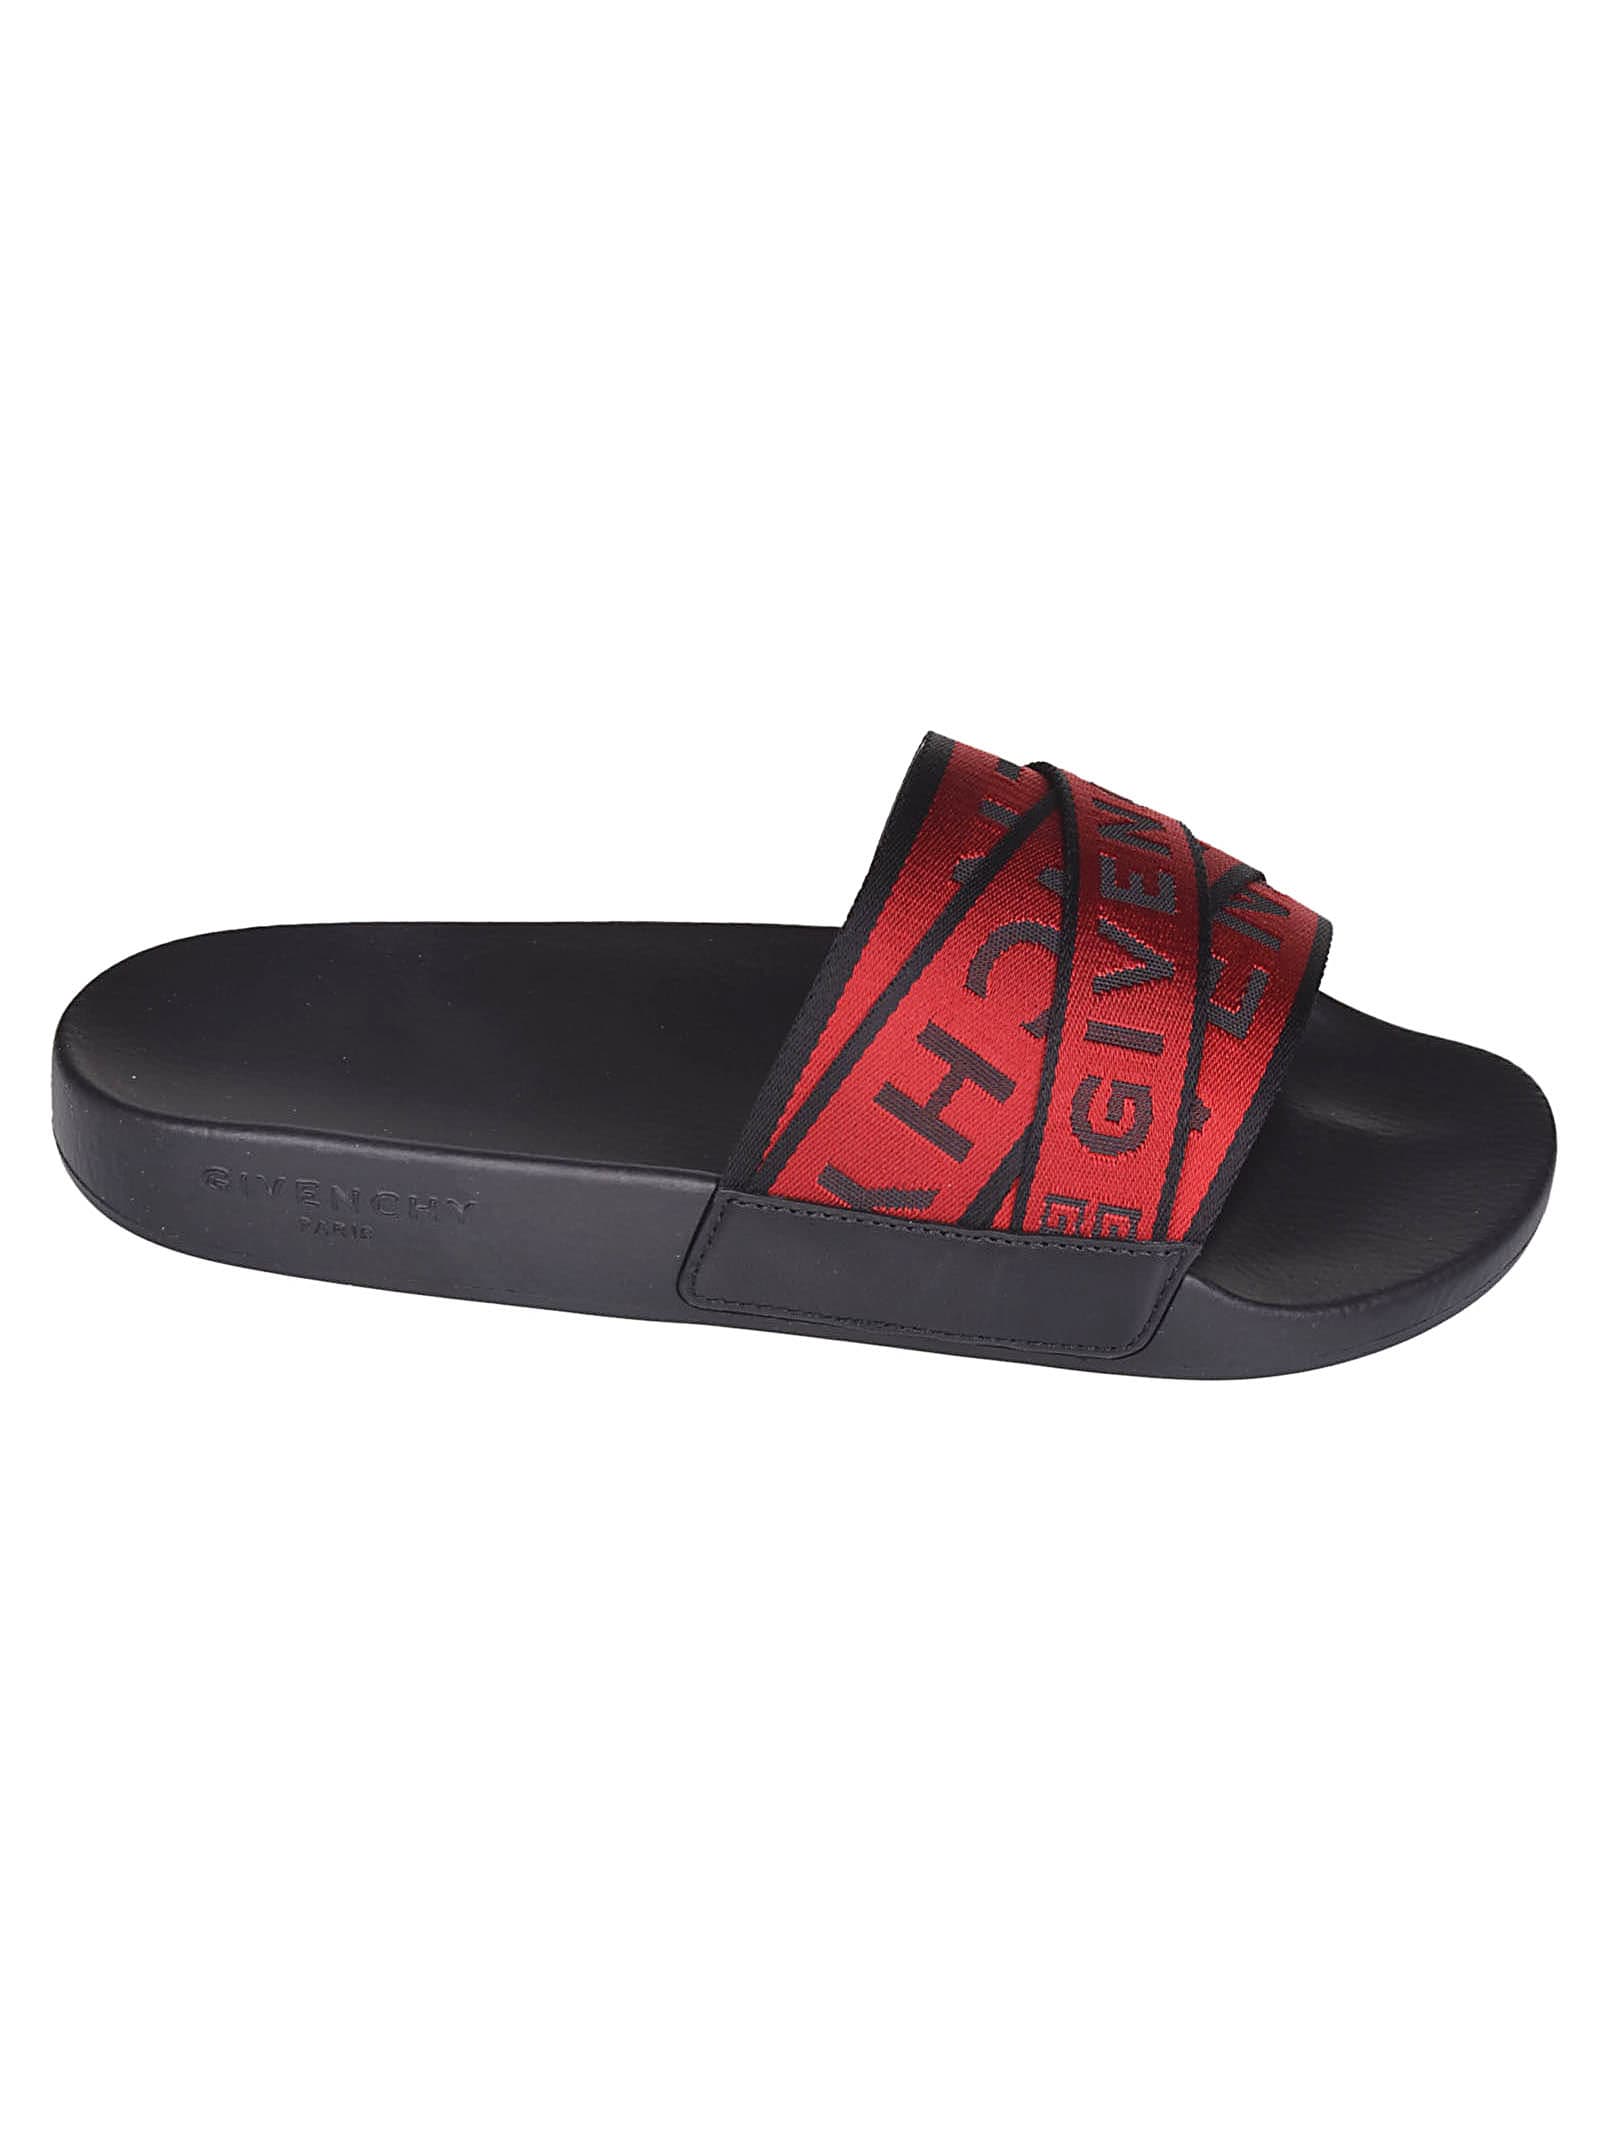 Givenchy Givenchy Logo Strap Sliders - Red/black - 10851810 | italist